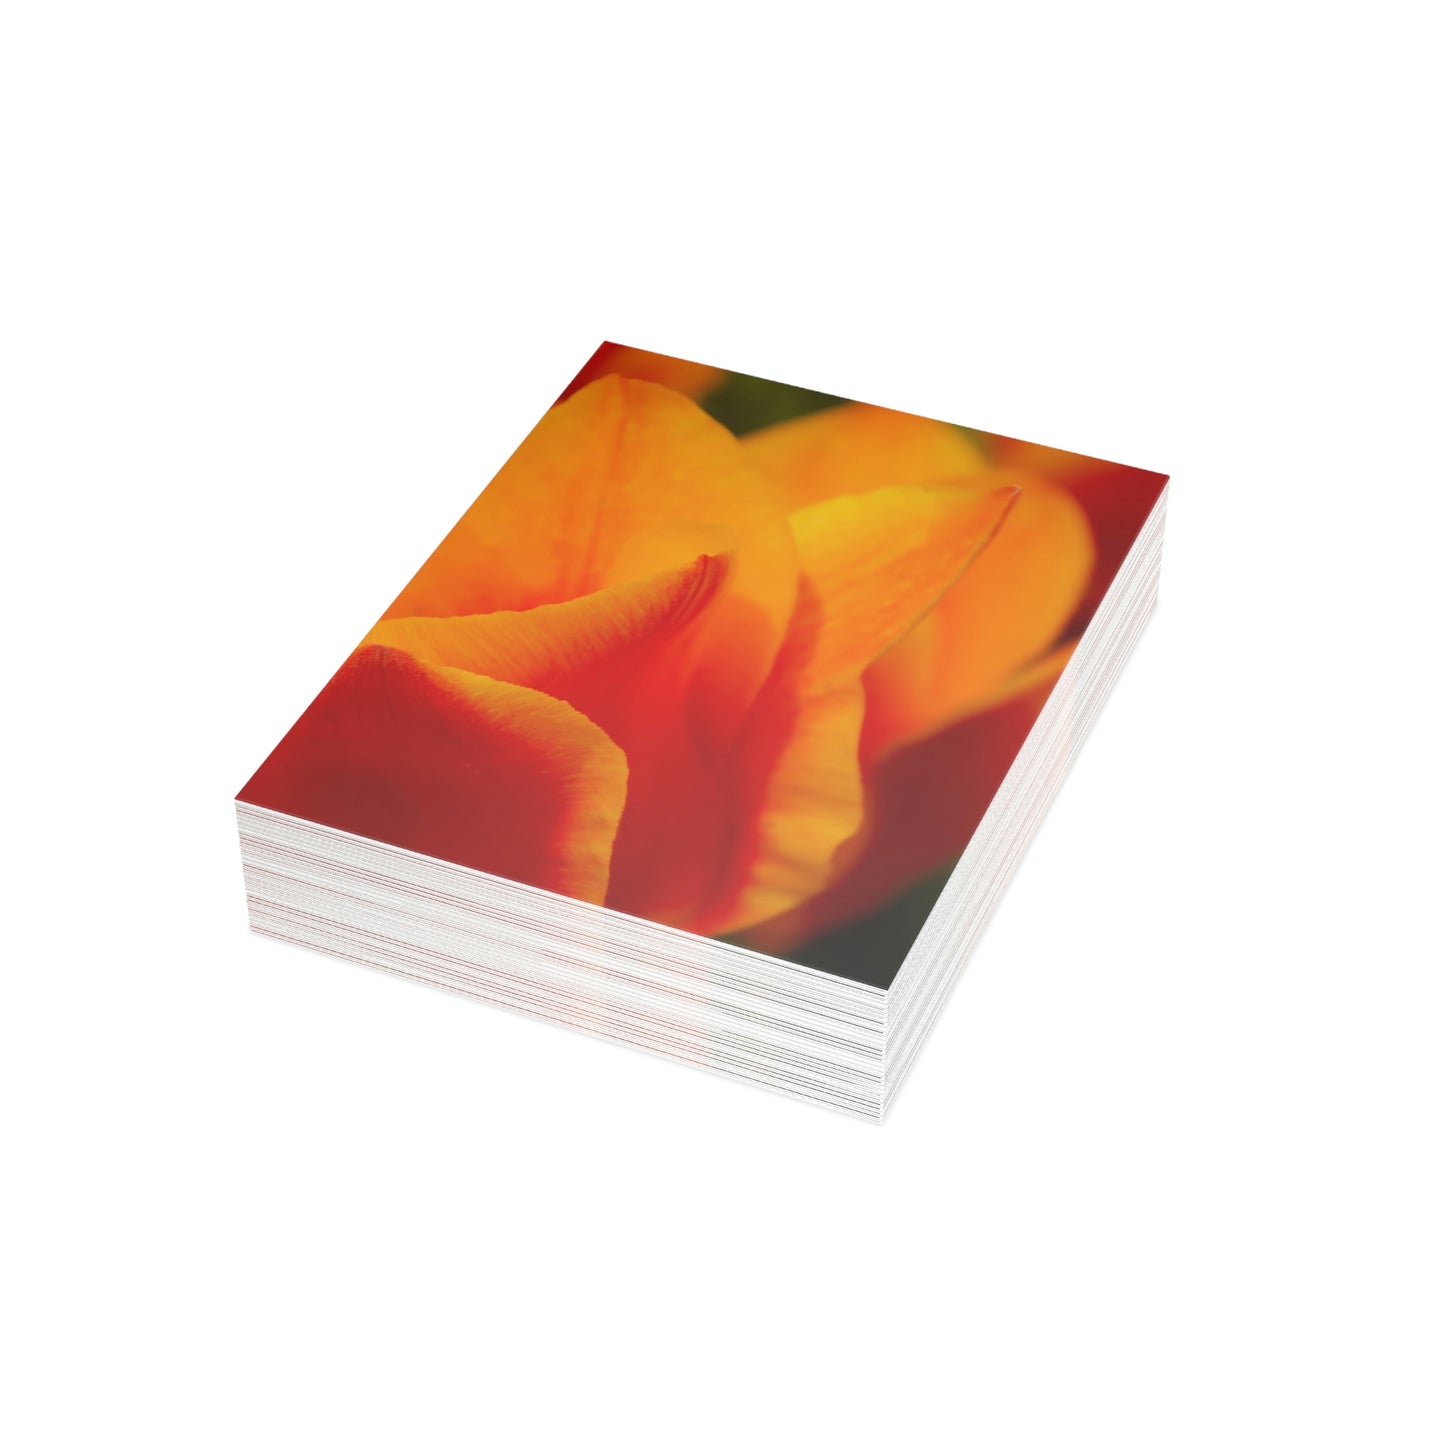 Flowers 15 Greeting Cards (1, 10, 30, and 50pcs)